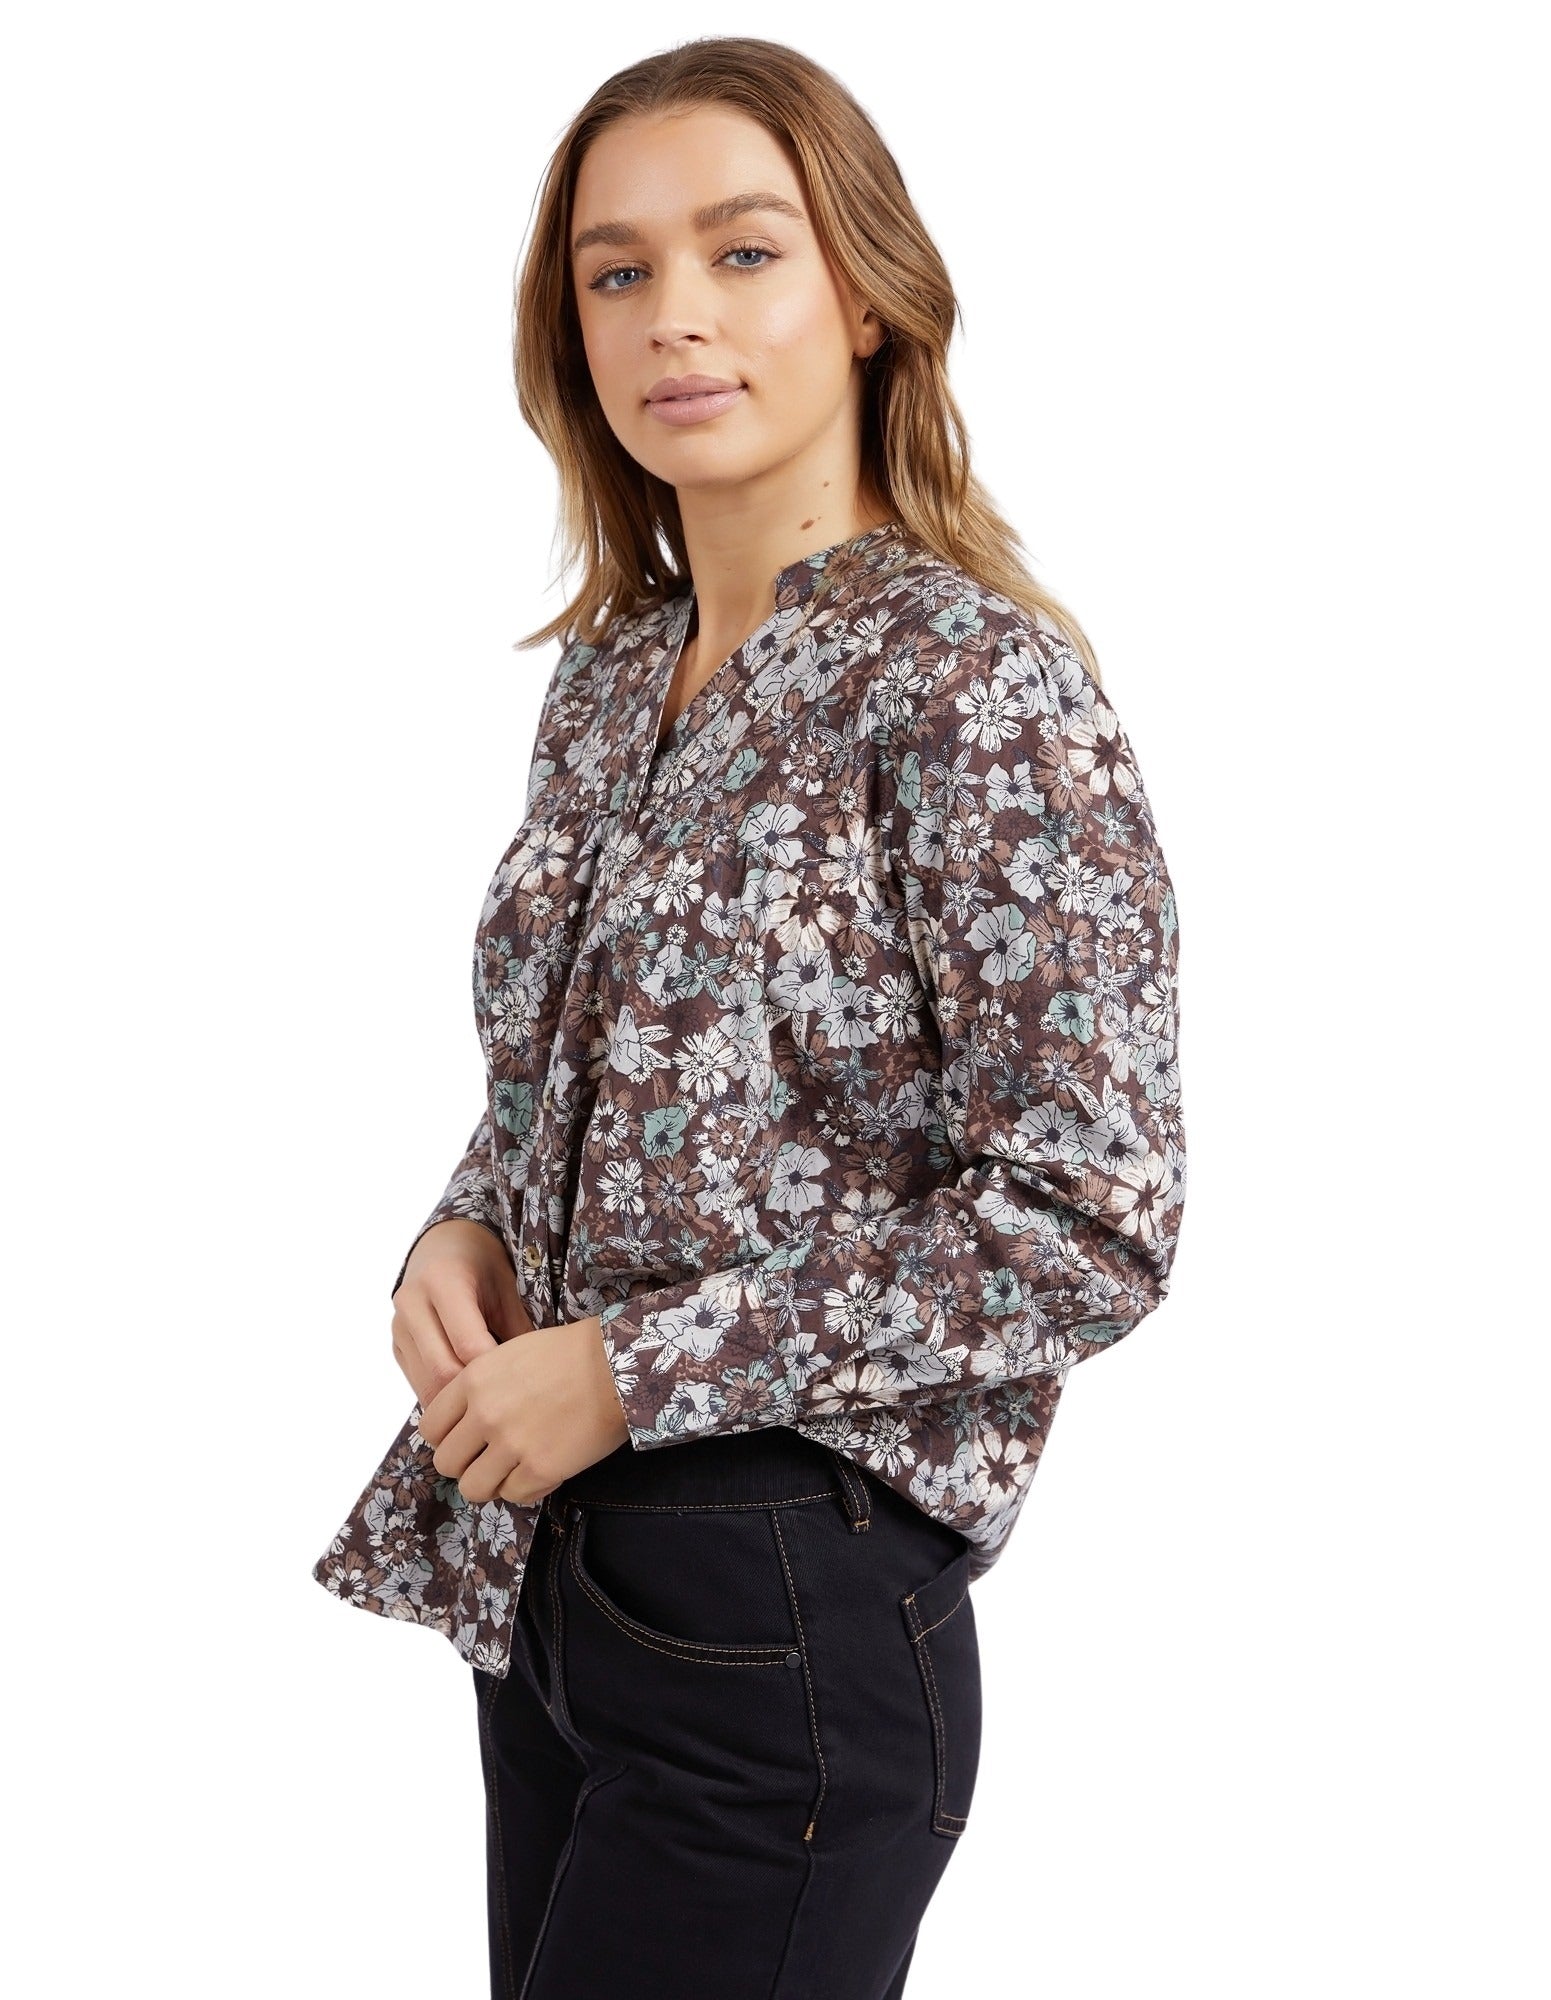 Foxwood Floral Meadow Blouse - Print